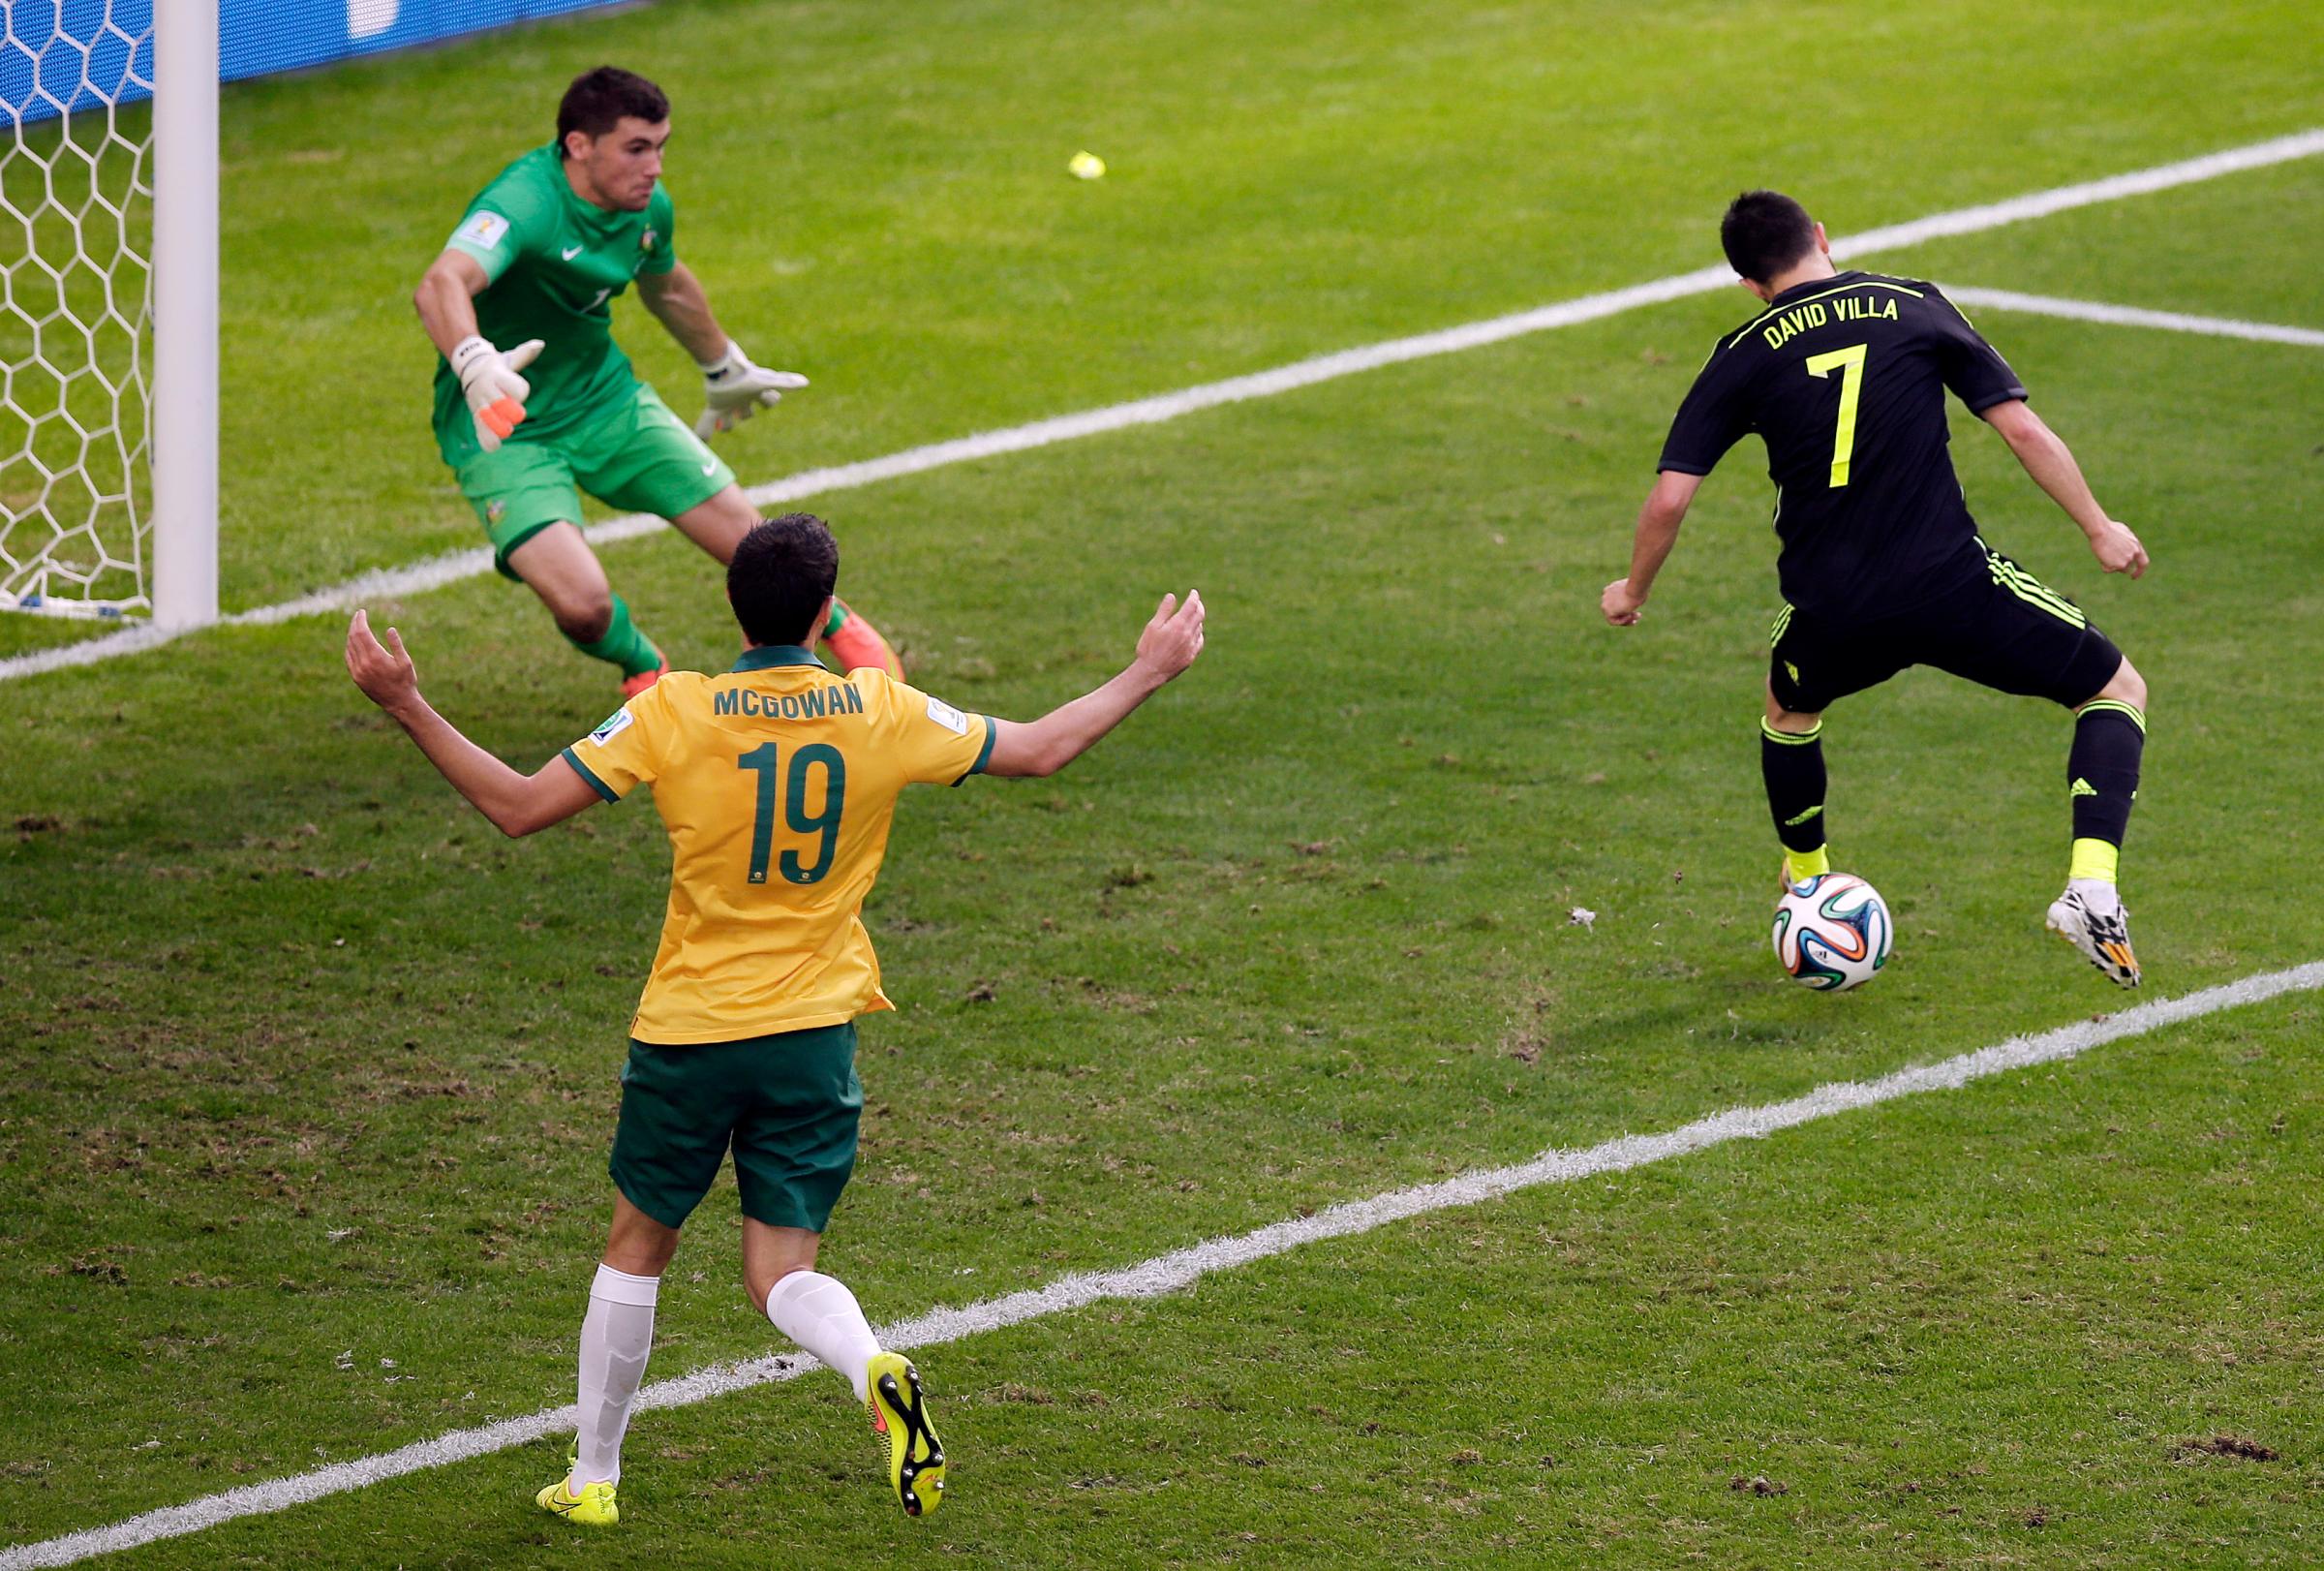 Spain's David Villa scores the team's first goal during the group B World Cup soccer match between Australia and Spain at the Arena da Baixada in Curitiba, Brazil on June 23, 2014.